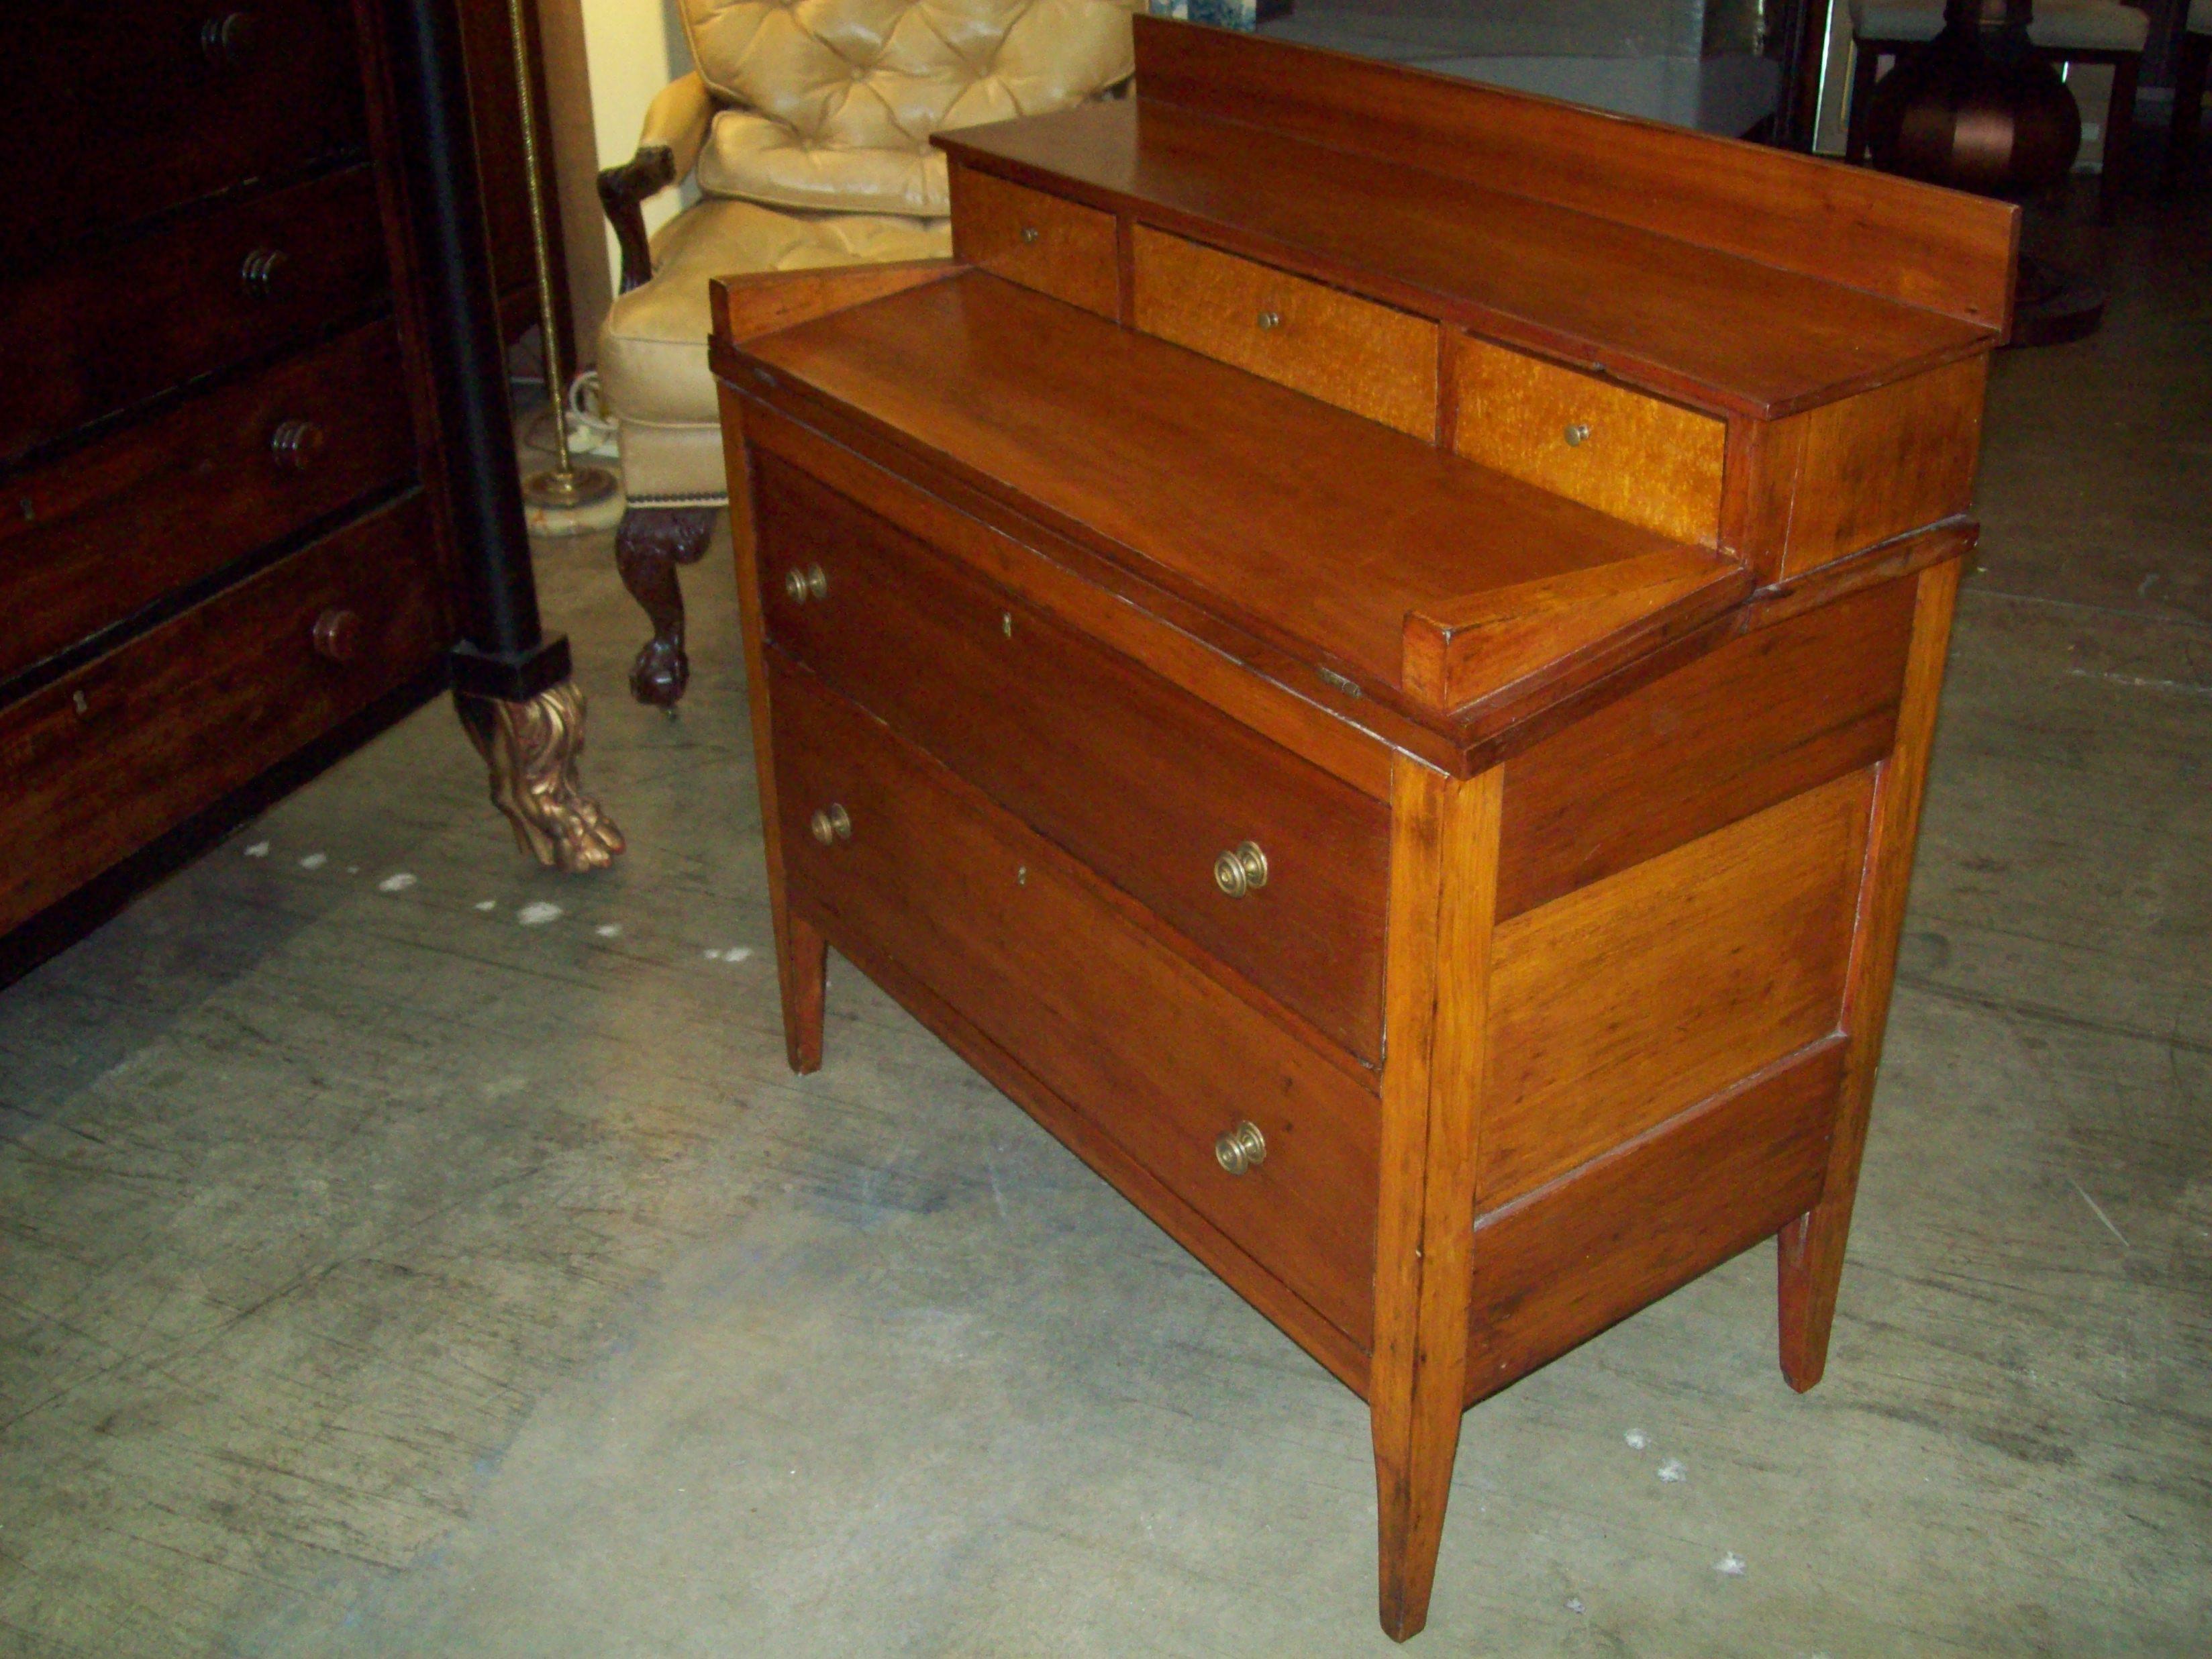 An American cherry drop-front desk in a characteristic country design in fully original condition. Well made with dovetailed drawers, intact legs and original locks and hardware. The small upper drawers are fronted in bird's-eye maple. Perfect for